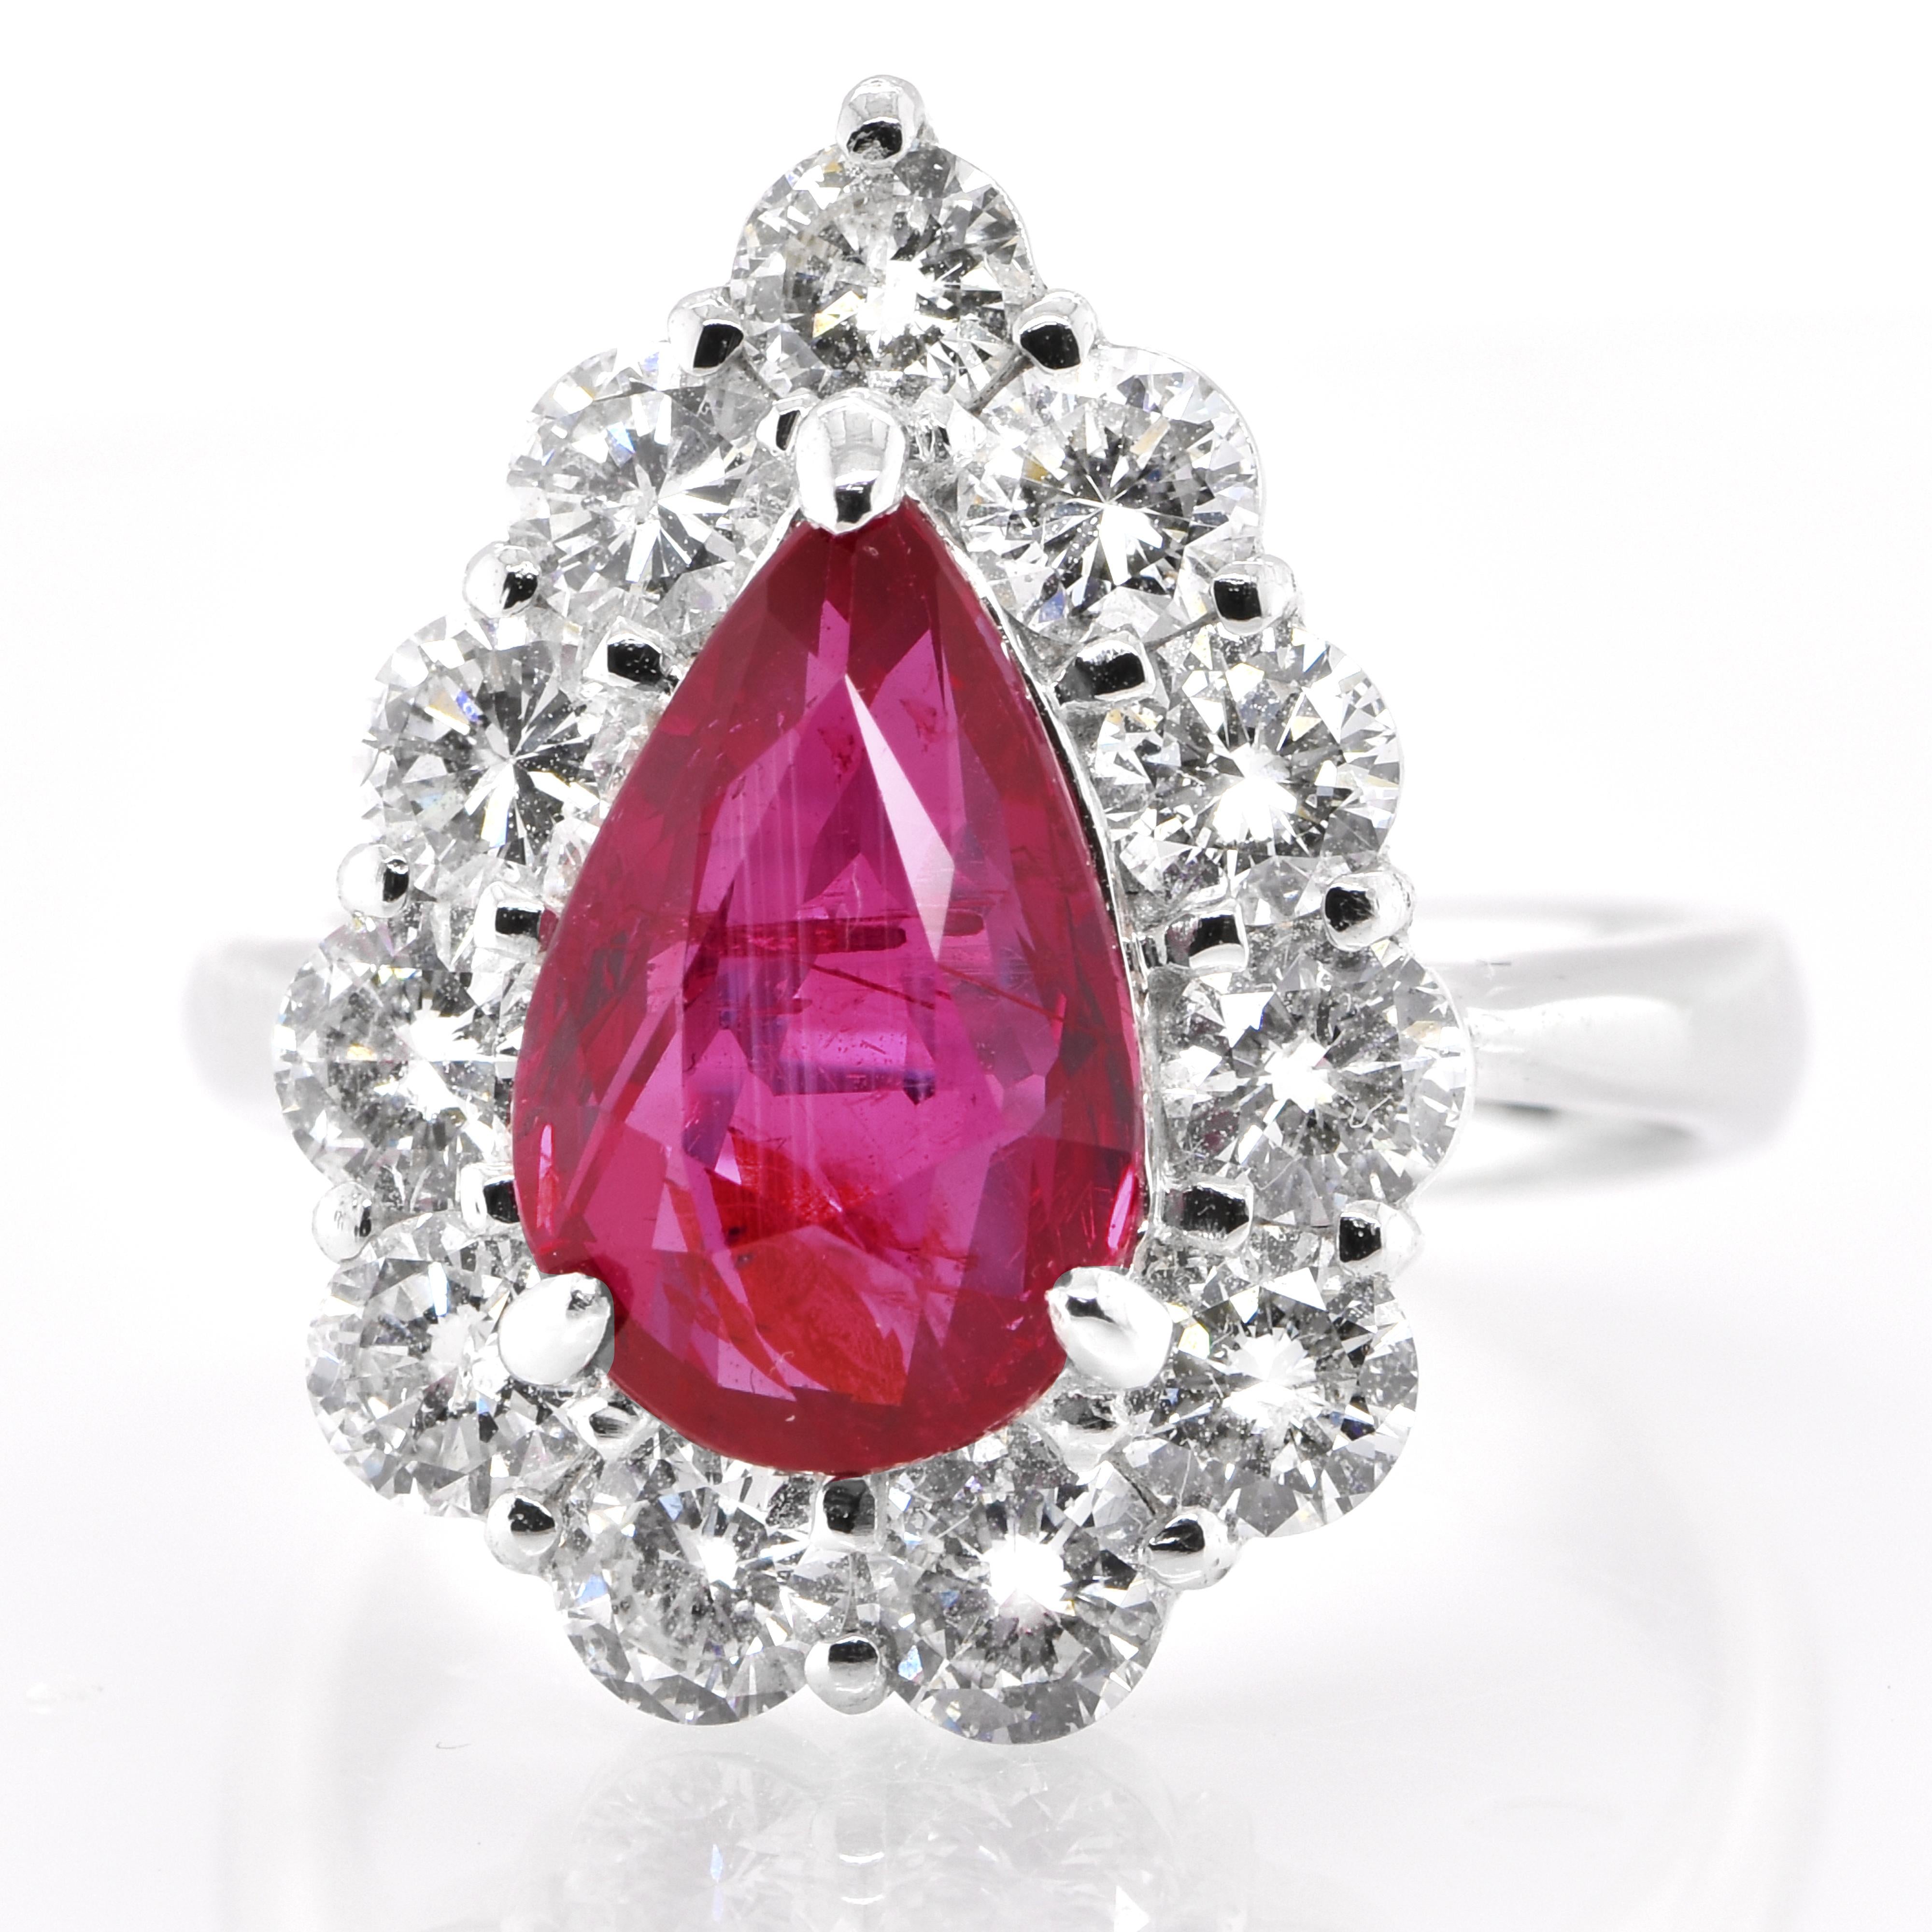 A beautiful ring set in Platinum featuring a GIA Certified 4.01 Carat Natural Mozambique No Heat Ruby and 2.05 Carat Diamonds. Rubies are referred to as 